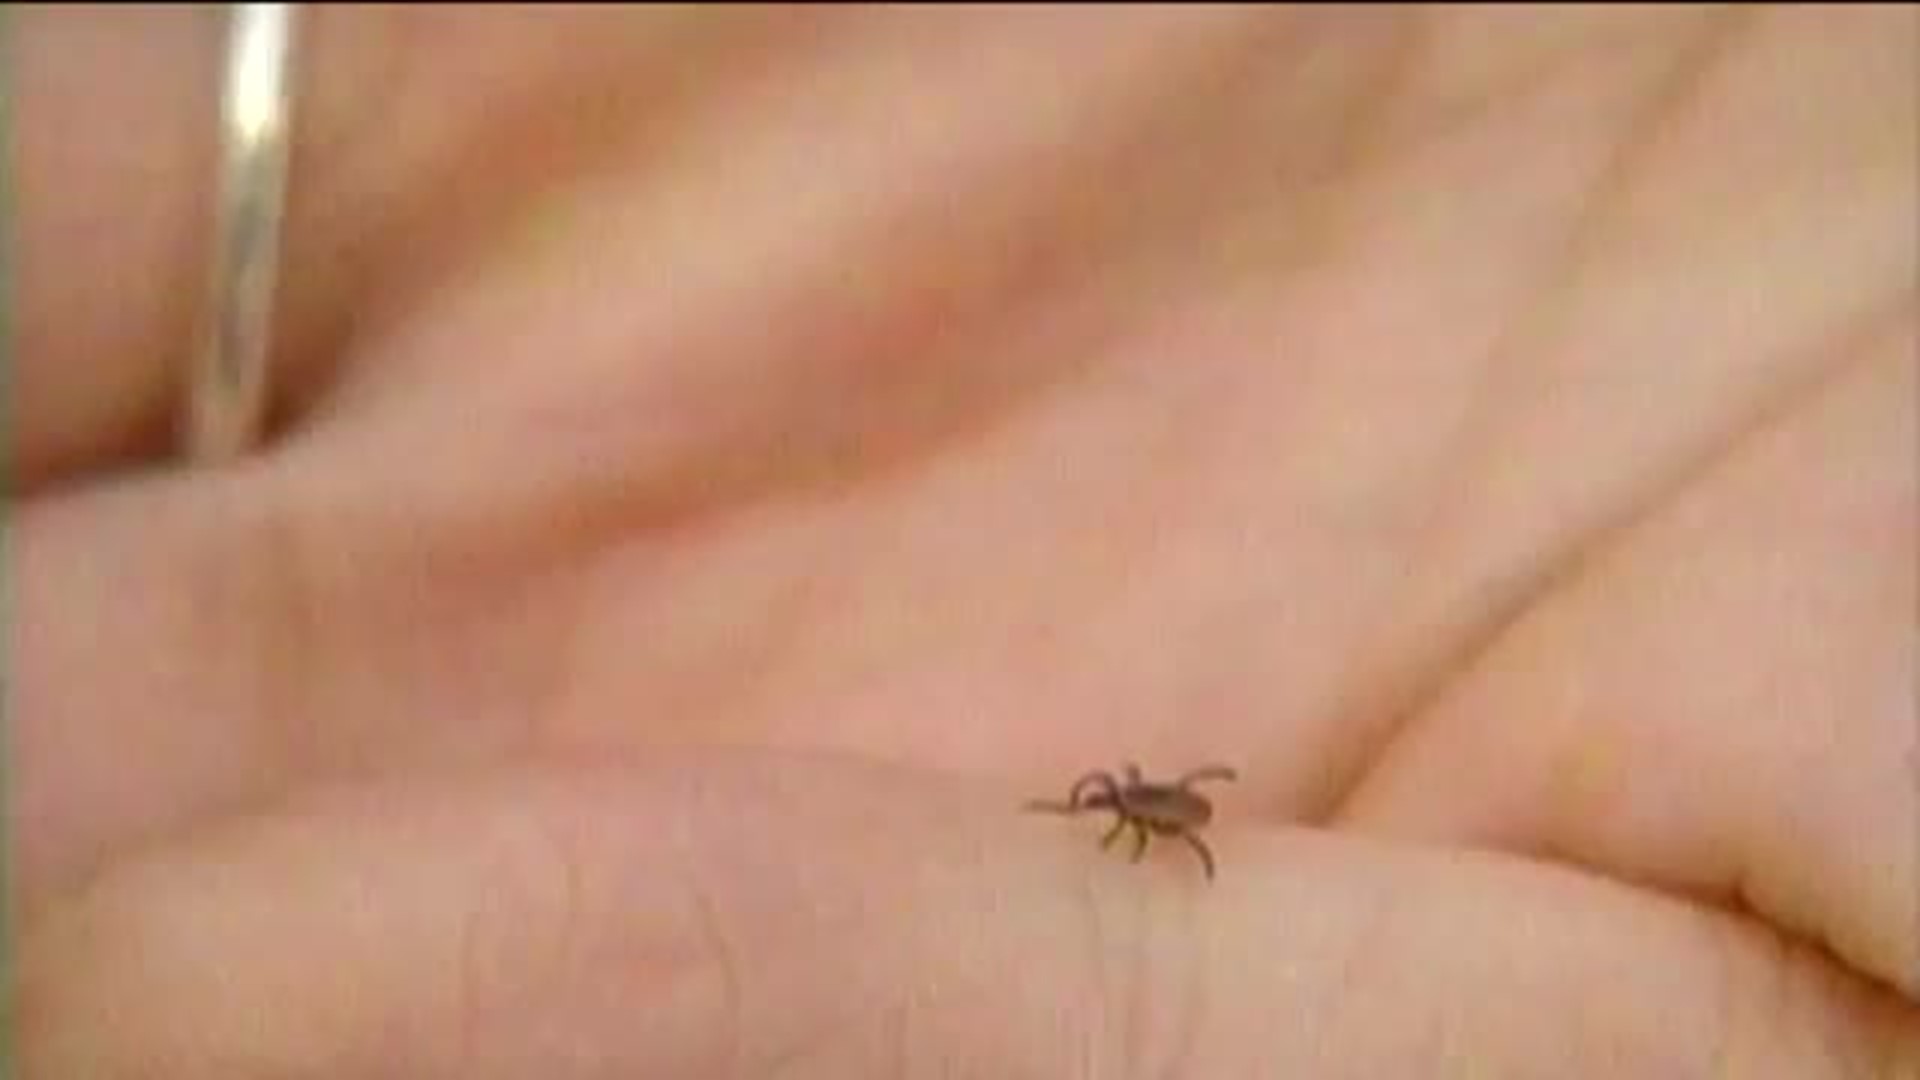 New Health Center Opens for People with Tick-Borne Diseases